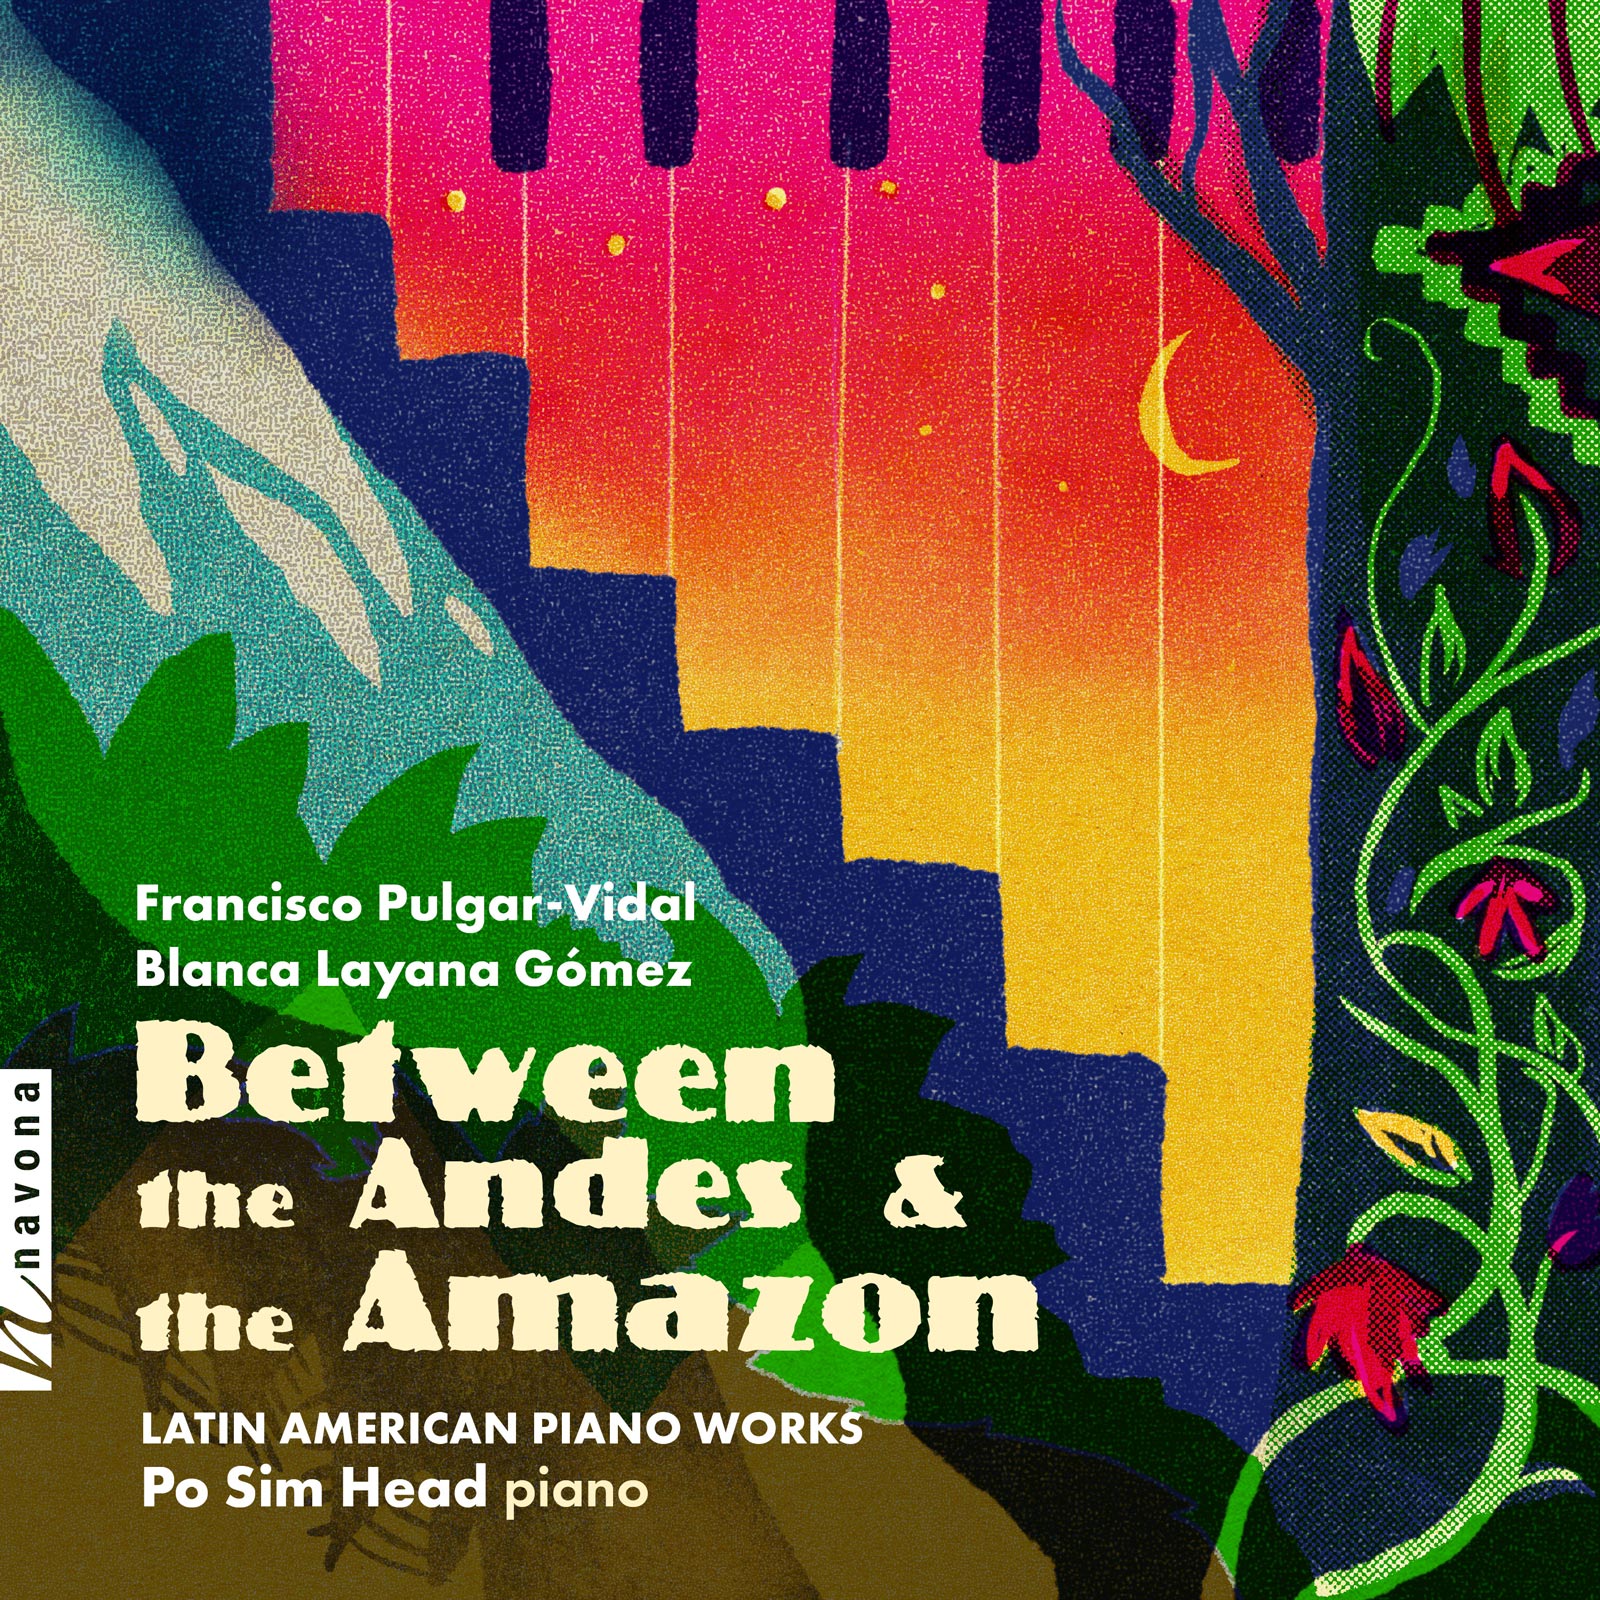 Between the Andes & the Amazon - album cover